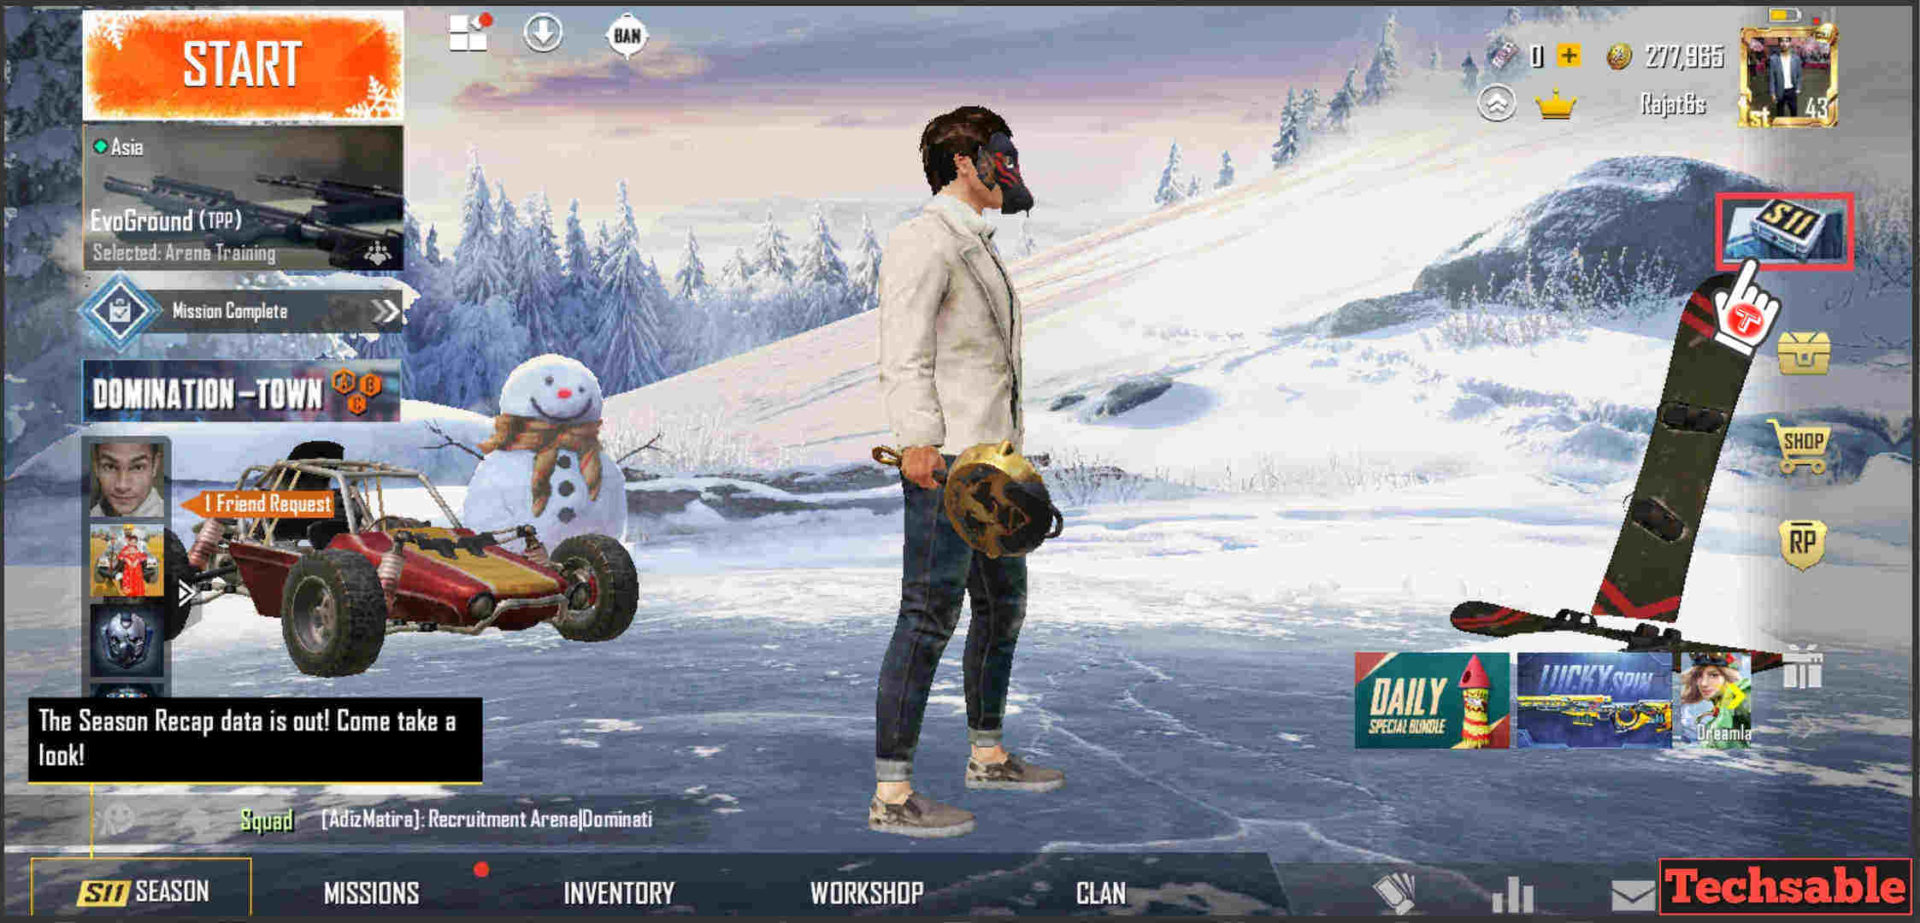 How to Get Free Skins in PUBG Mobile: 2020 Google Trick - Techsable